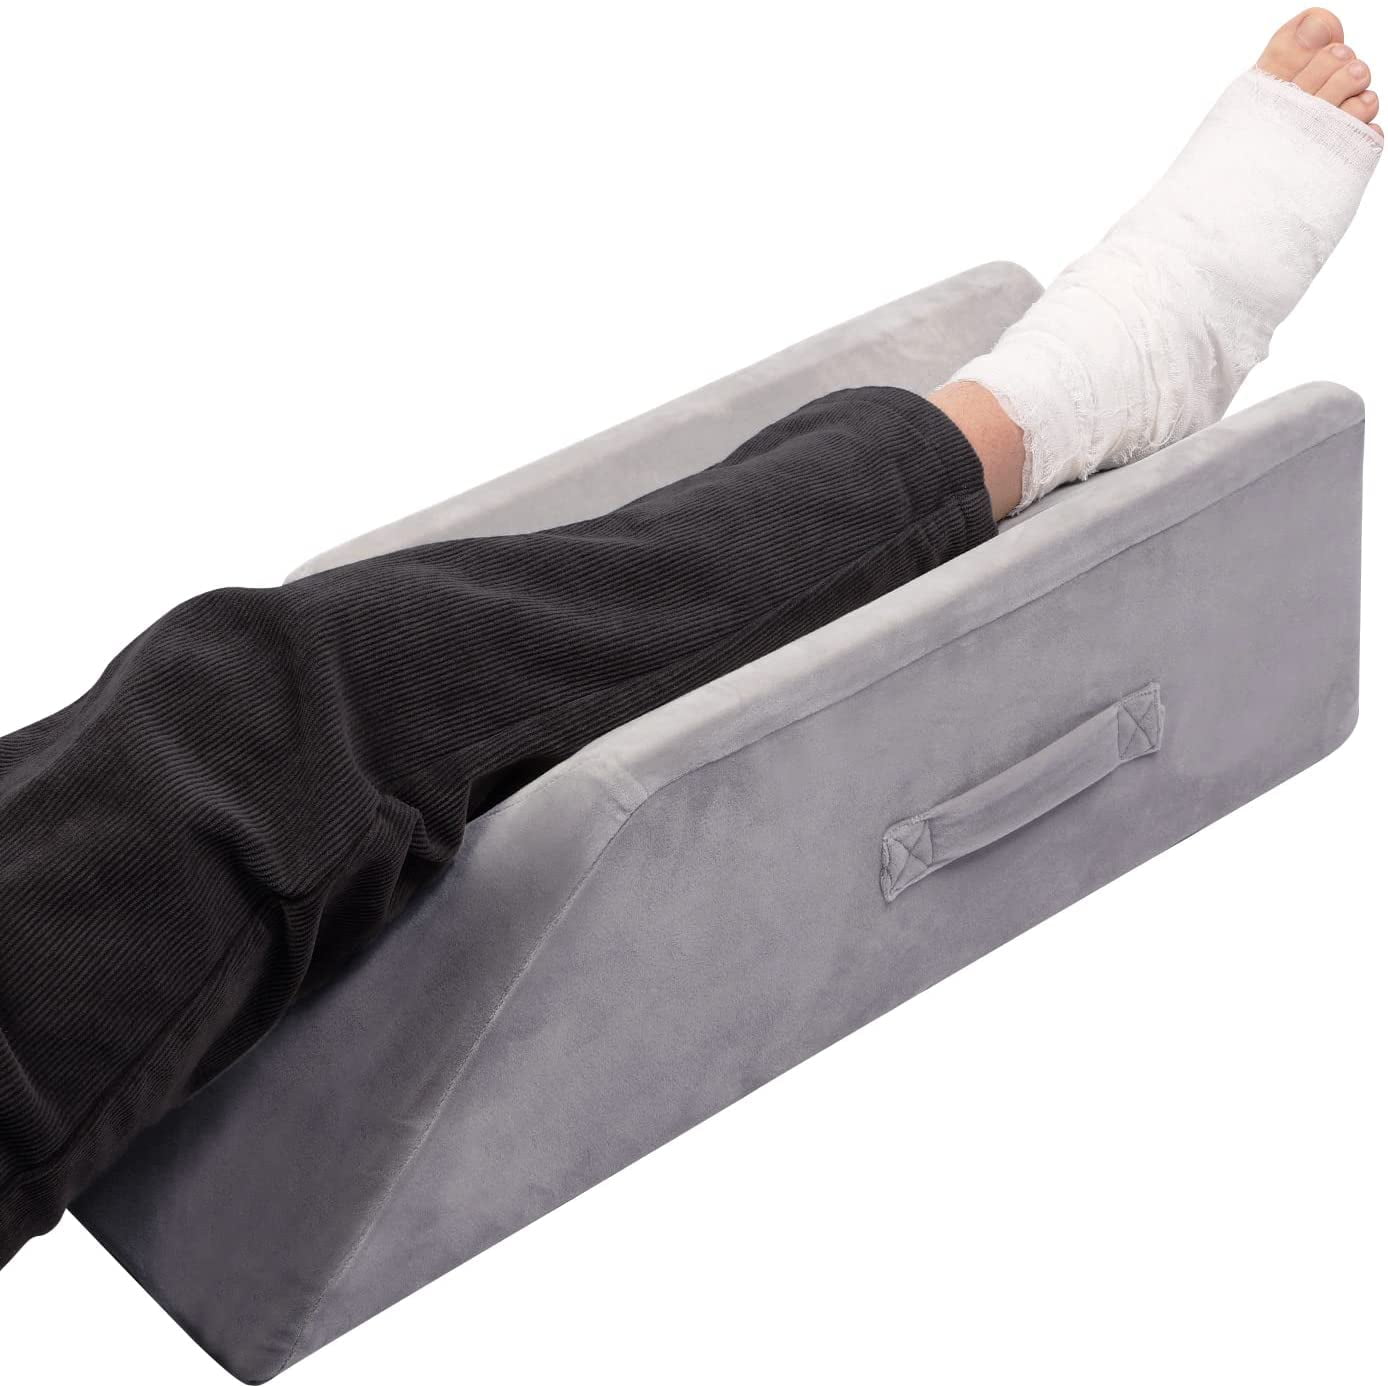 Knee Replacement Wedge Pillow: Prepare for TKA • Wedge Pillow Blog